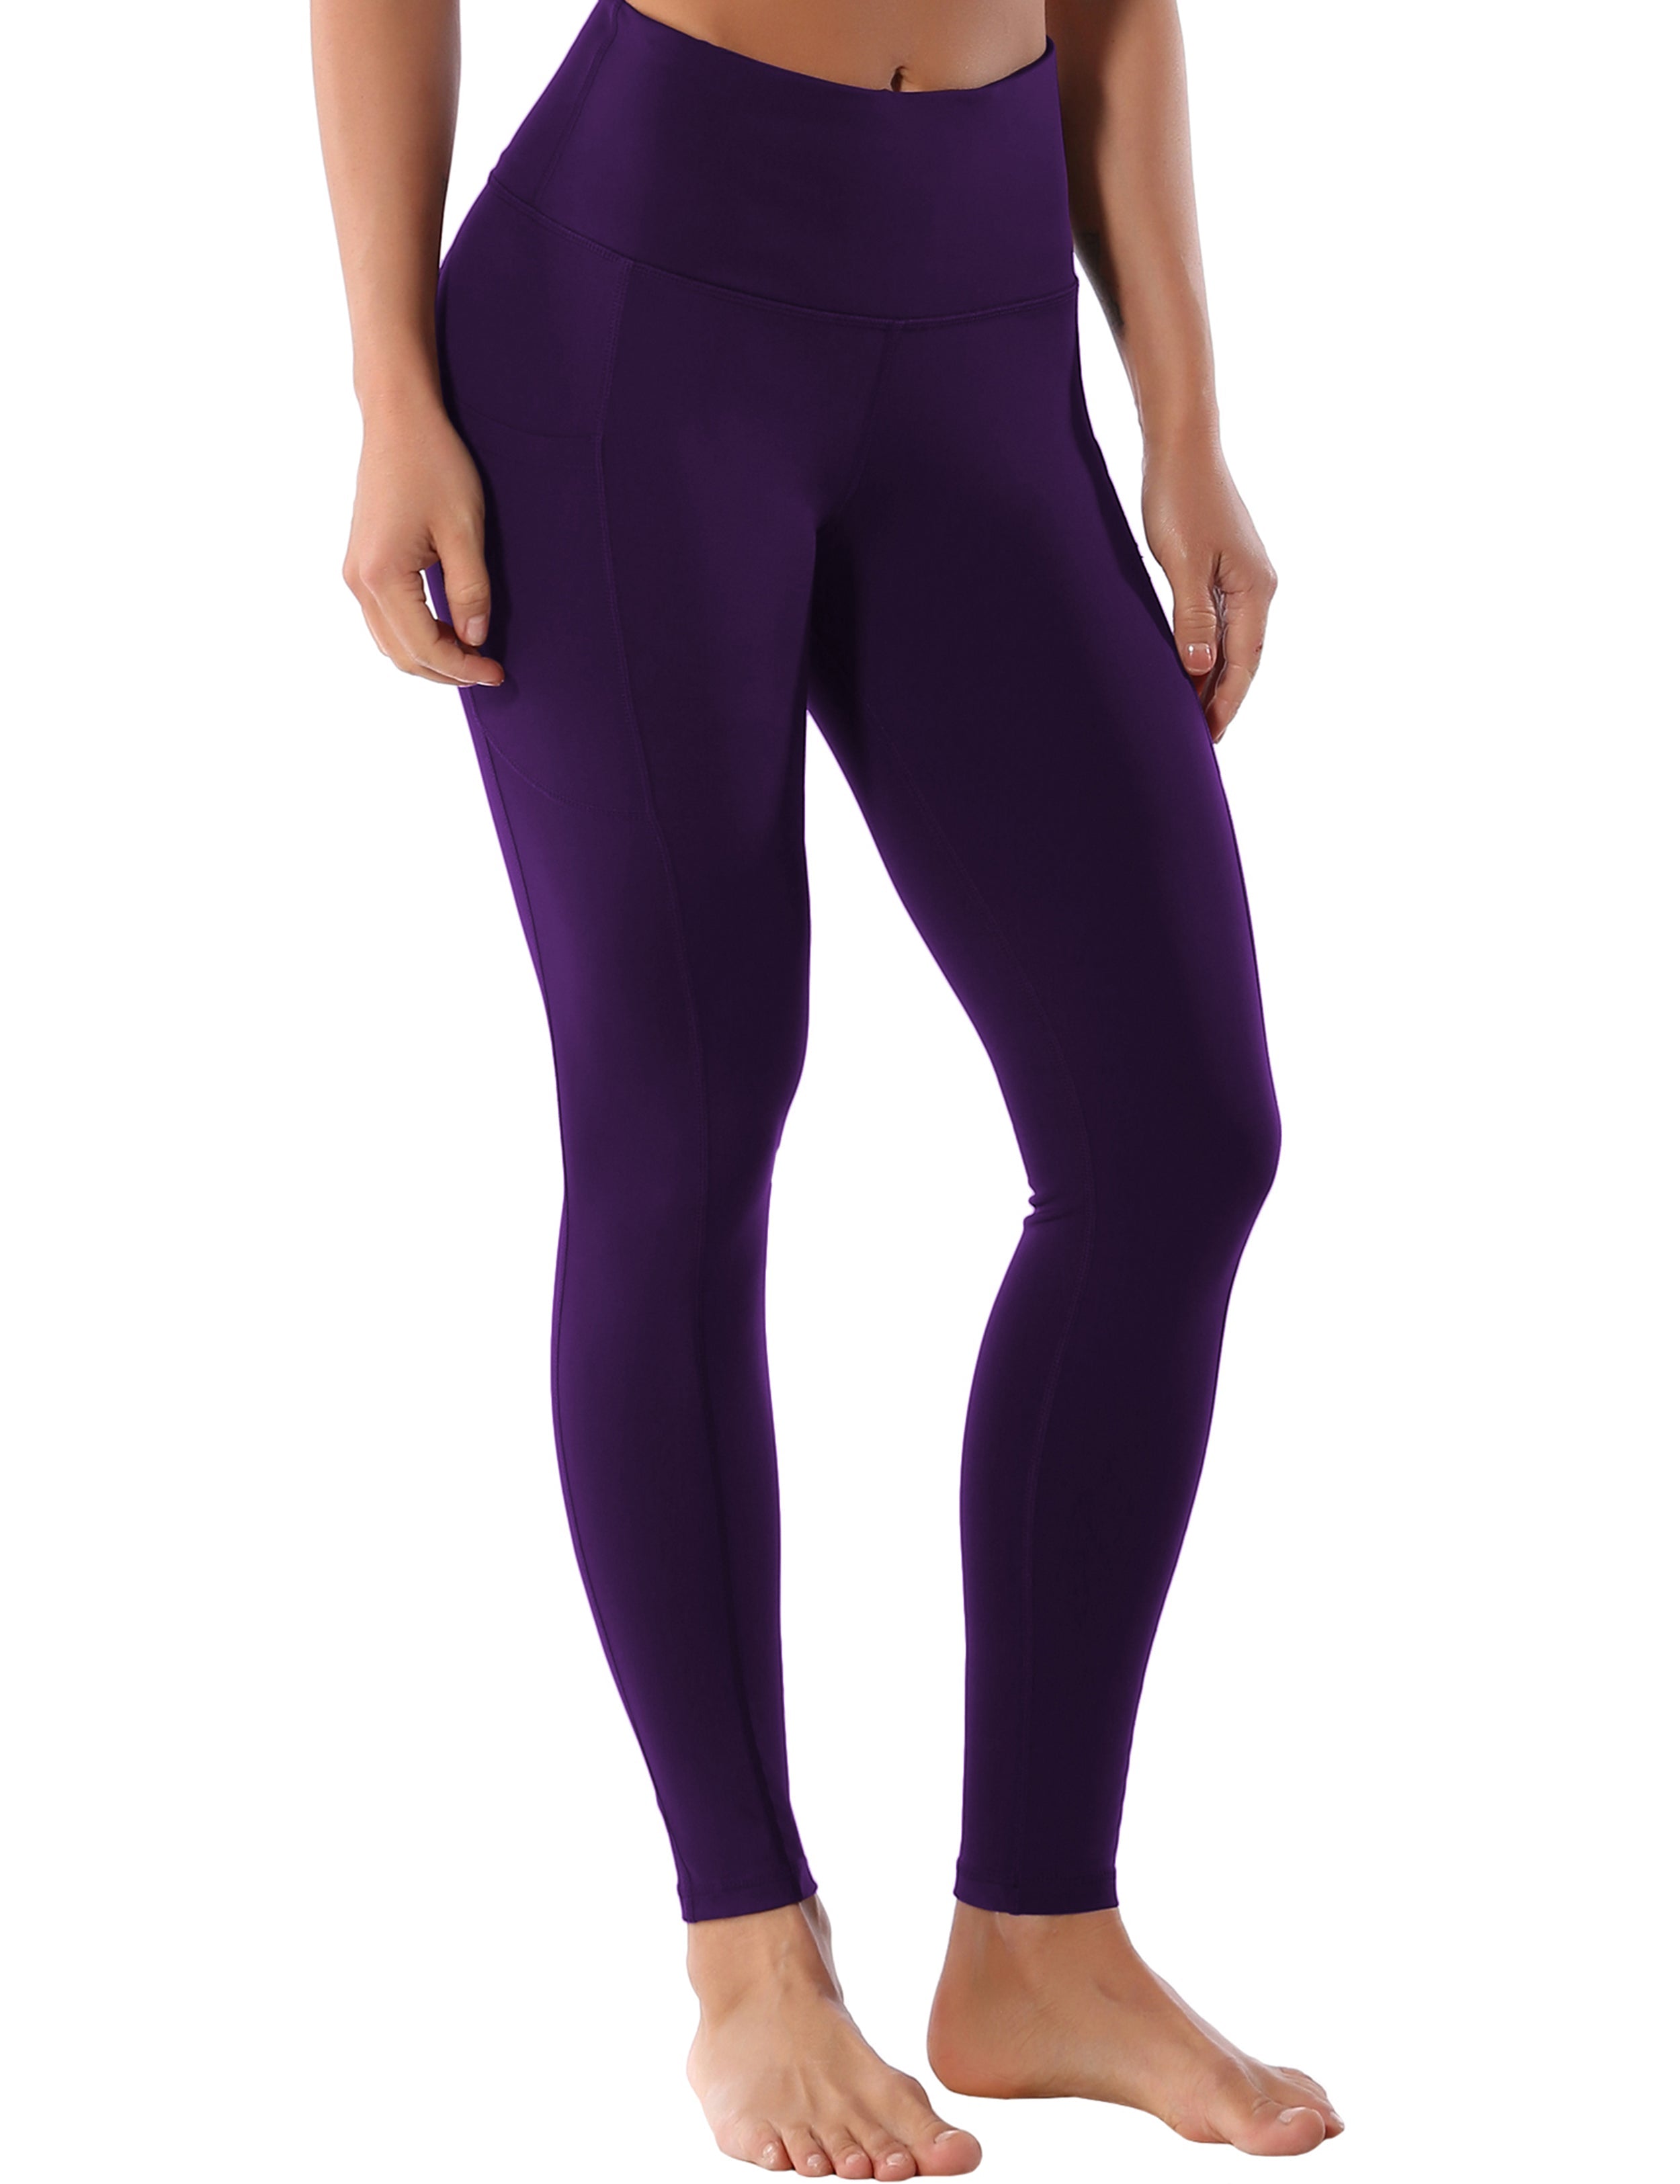 Hip Line Side Pockets Jogging Pants eggplantpurple Sexy Hip Line Side Pockets 75%Nylon/25%Spandex Fabric doesn't attract lint easily 4-way stretch No see-through Moisture-wicking Tummy control Inner pocket Two lengths